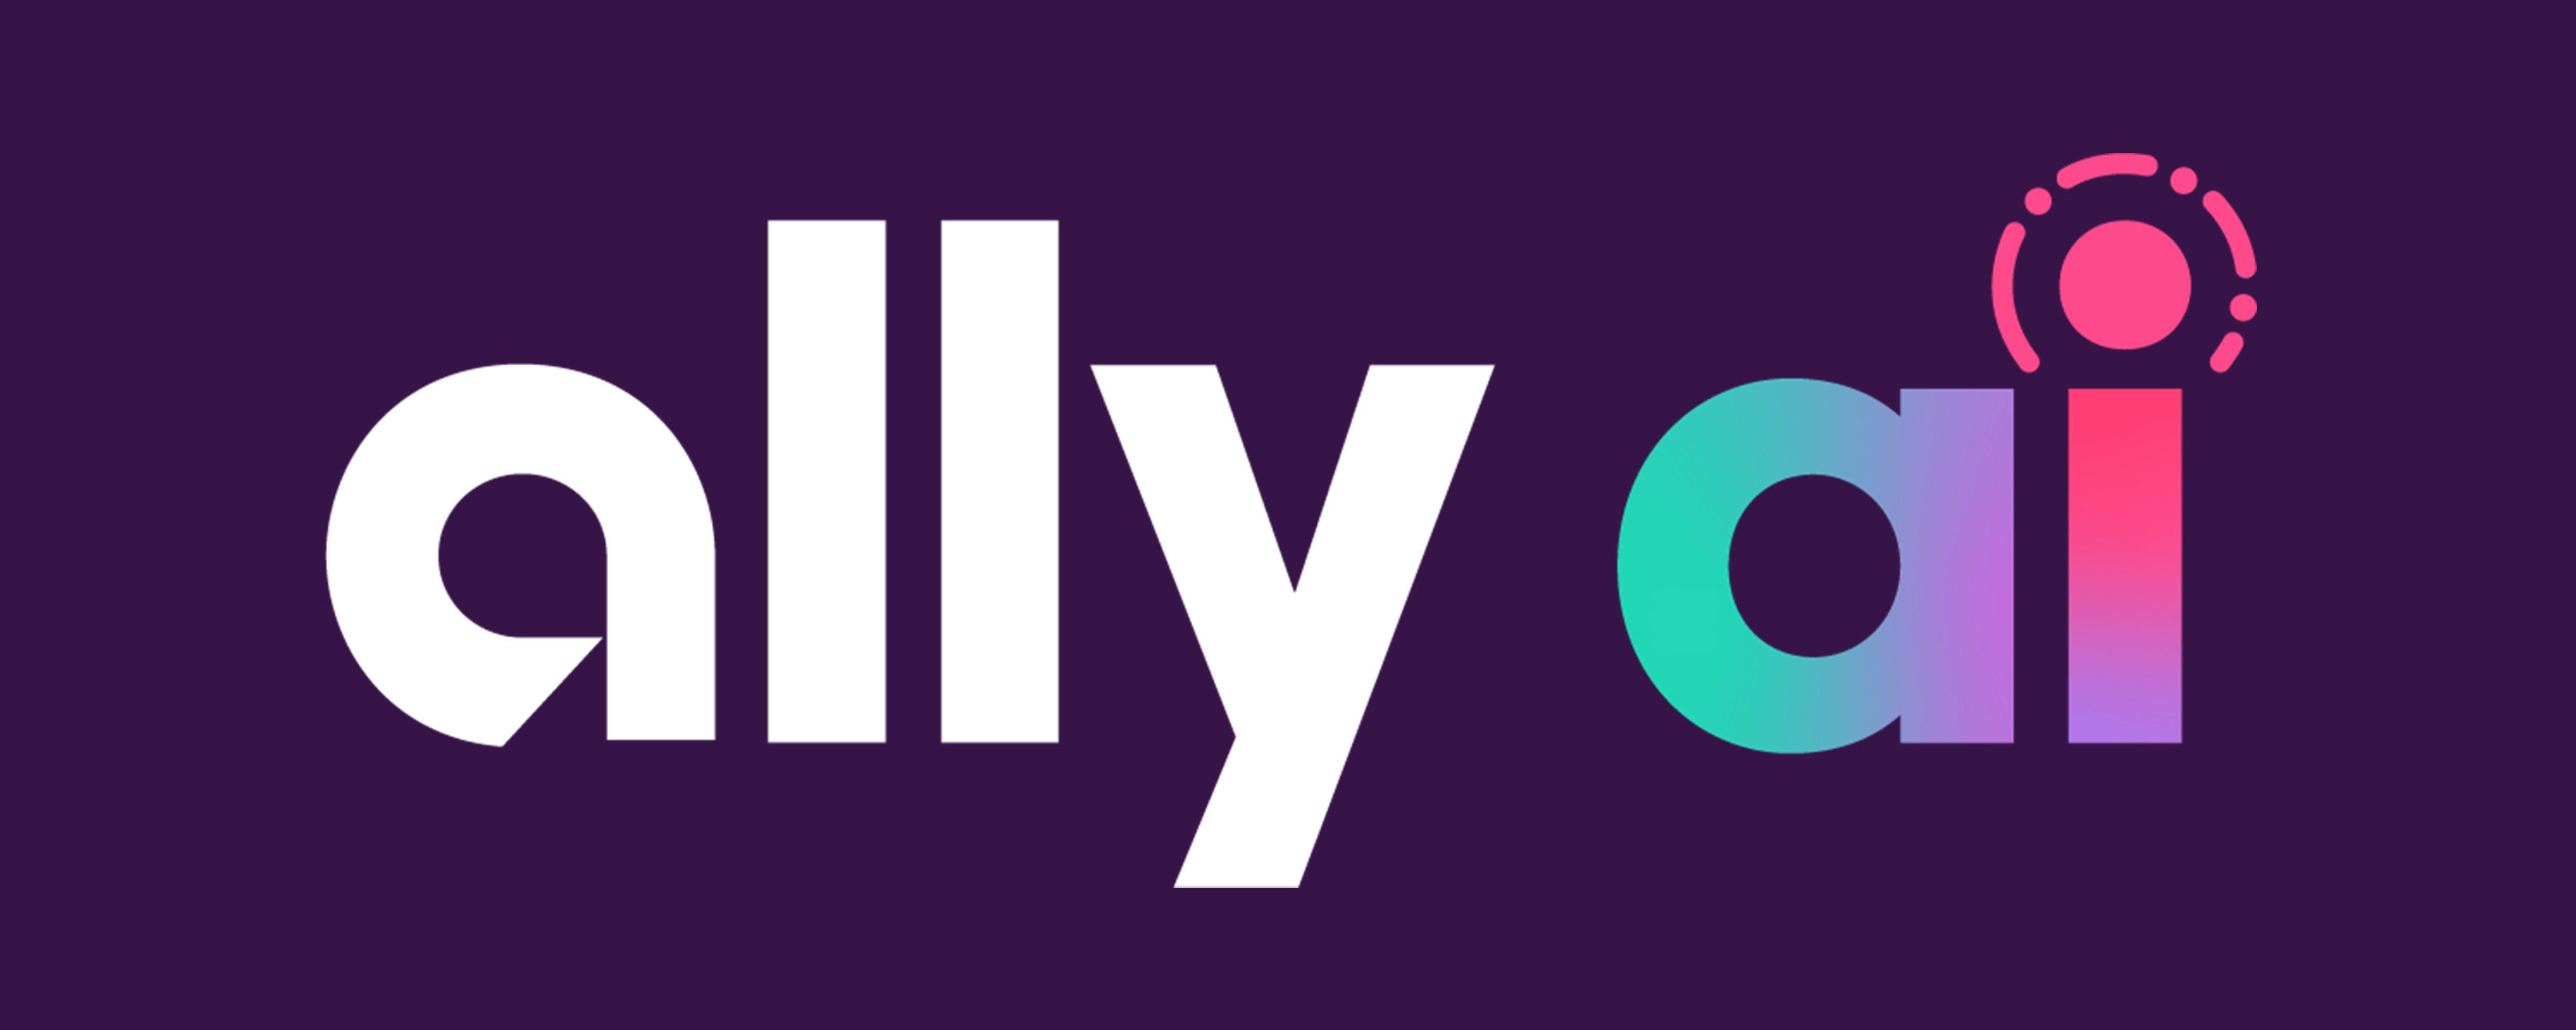 Illustration: Ally.ai brand logo with "ally" in white and "ai" in a multicolored ombre style. The "I" is dotted with a hot pink circle with lines and dots around it.